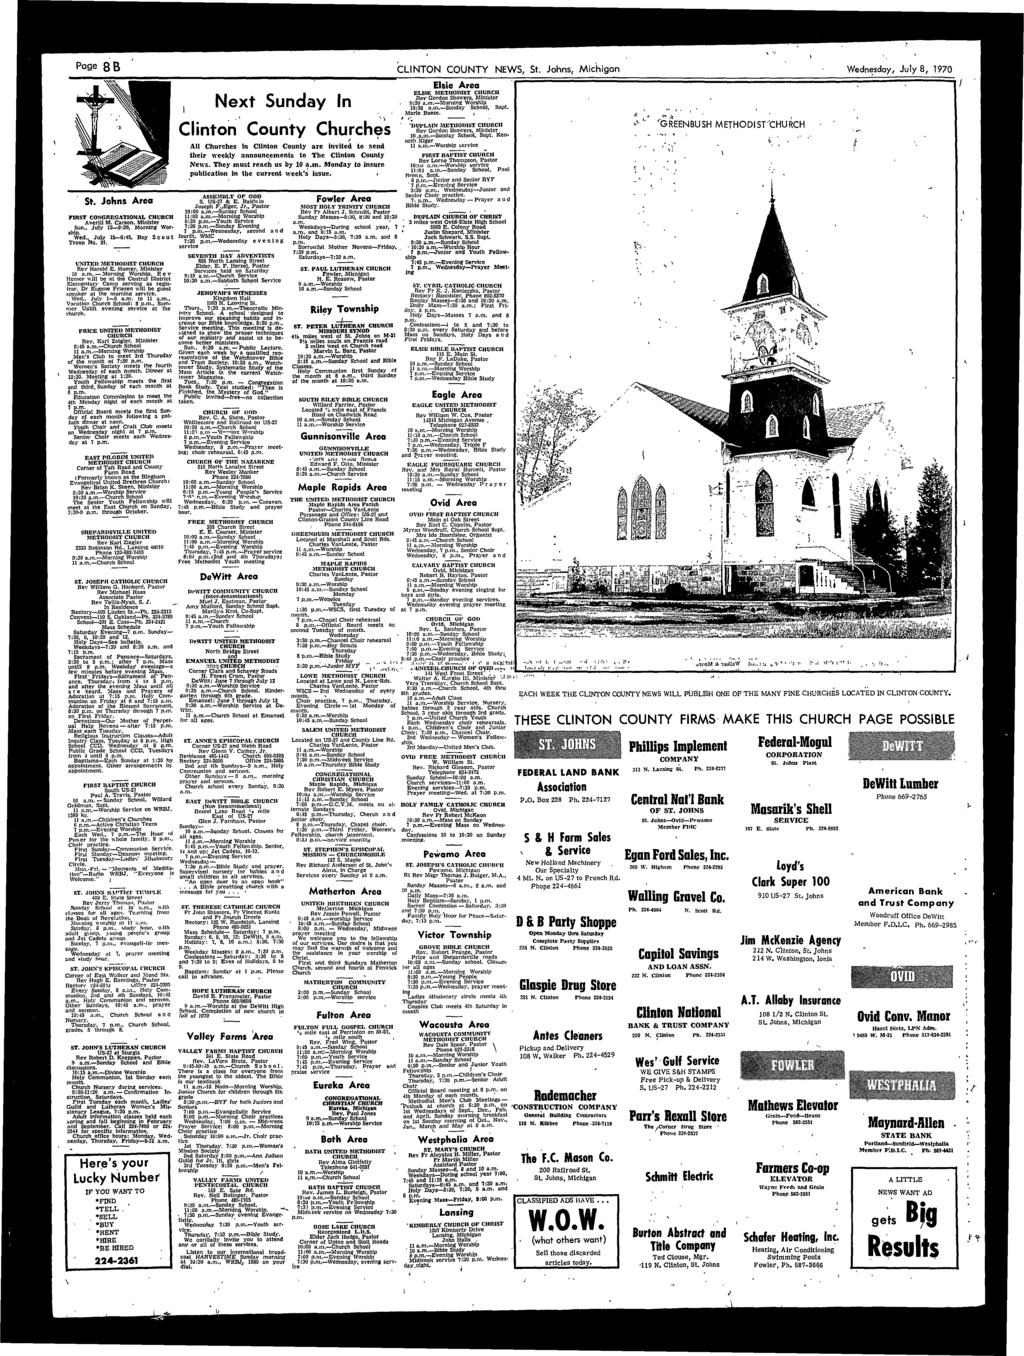 Page B CLINTON COUNTY NEWS, St. Johns, Mchgan Wednesday, July, 970 St. Johns Area FIRST CONGREGATIONAL CHURCH Avcrll M. Carson, Mnster Sun.. July 2 9:30, Mornng Wor«shp. Wed,. July 5 :5.